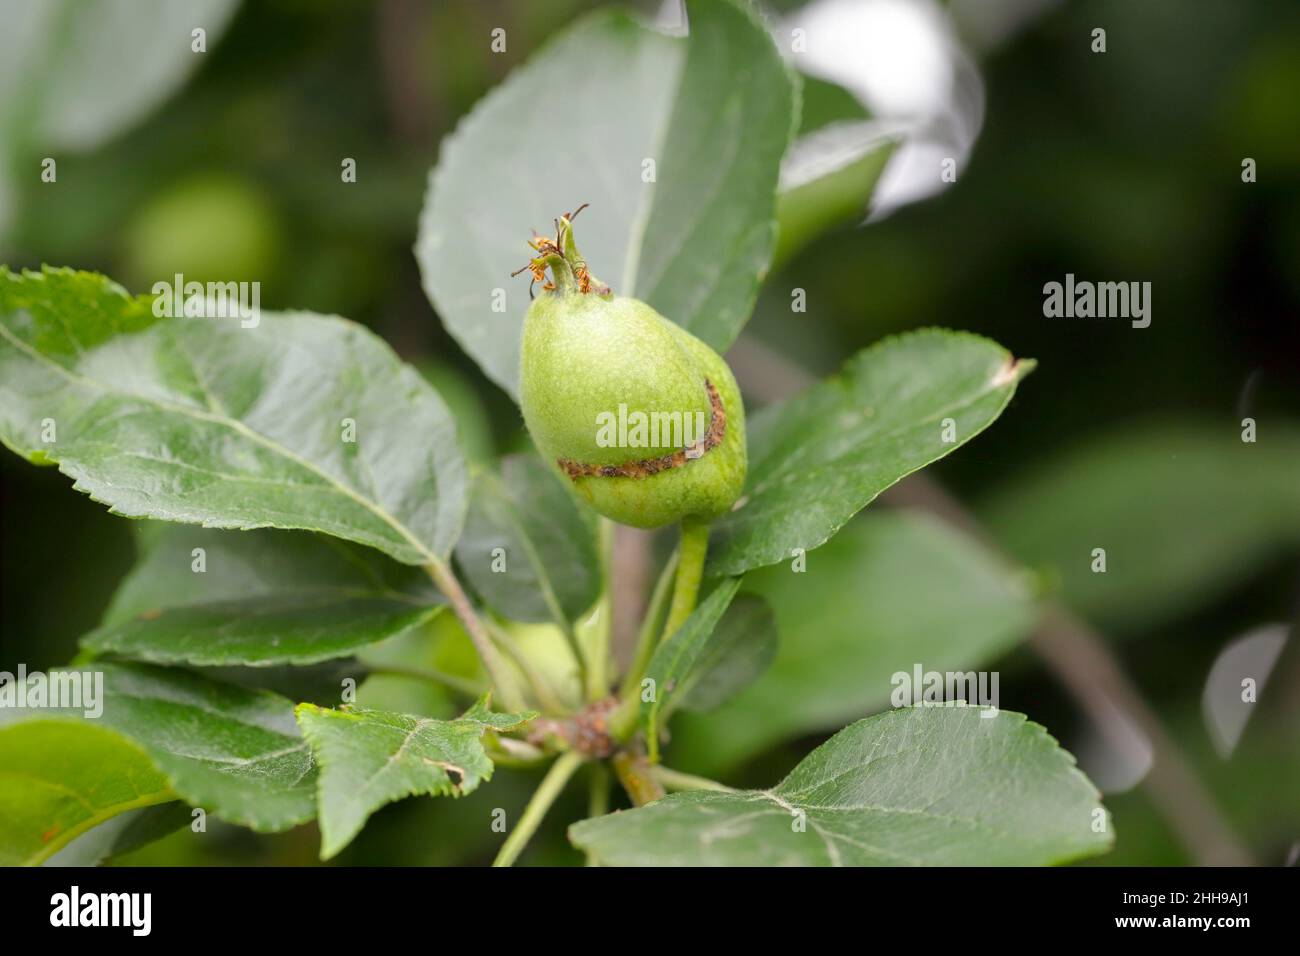 Apple damaged by larvae of european apple sawfly - Hoplocampa testudinea. It is one of the most important pests in orchards and gardens. Stock Photo